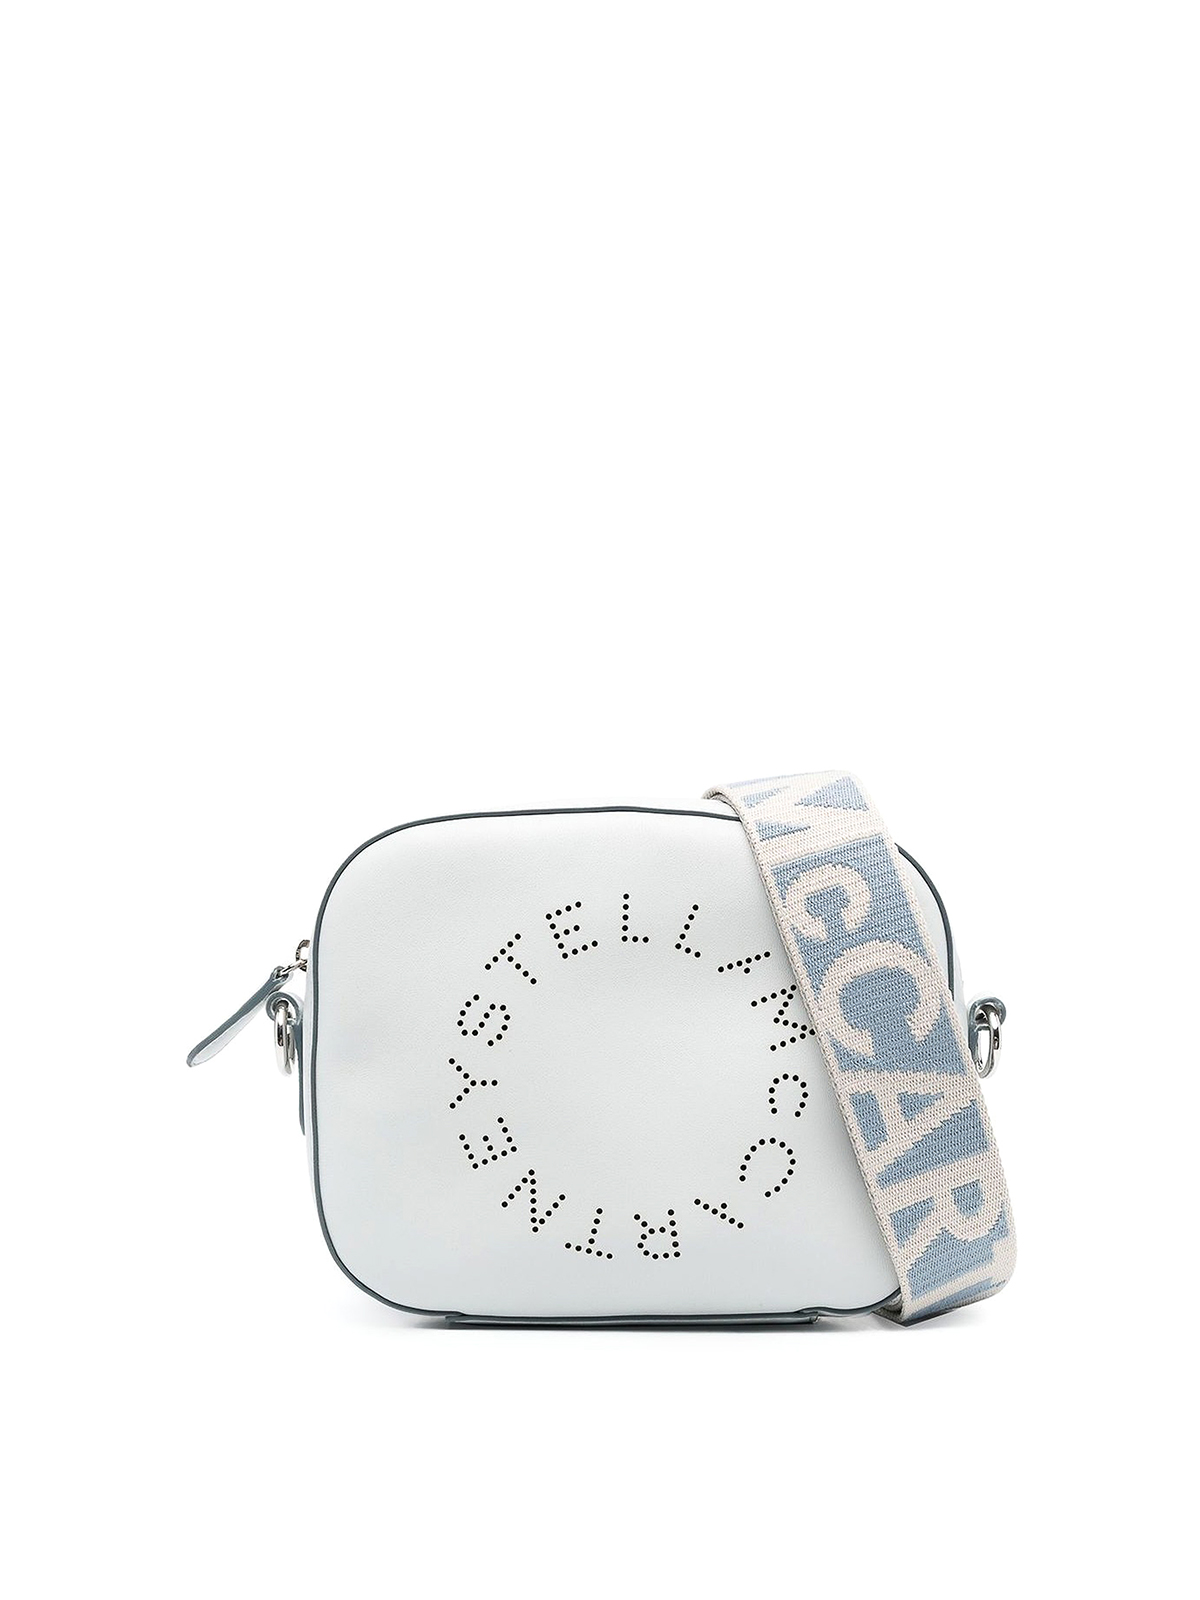 Stella Mccartney Faux Leather Camera Bag In White